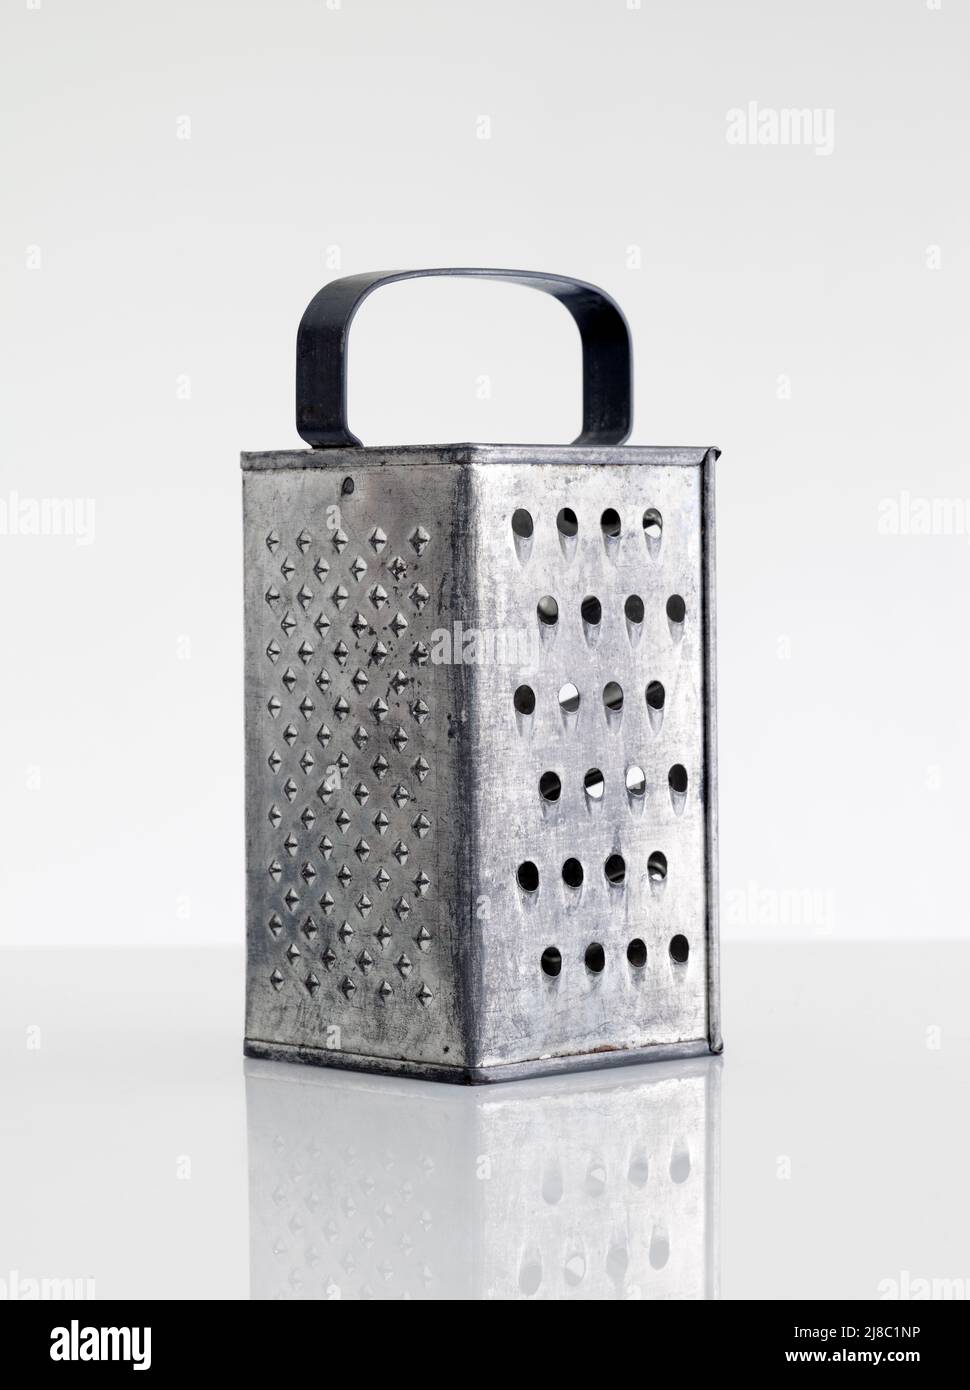 Antique Retro Flat Round Cheese Grater Stock Photo - Image of tool, shiny:  88310638